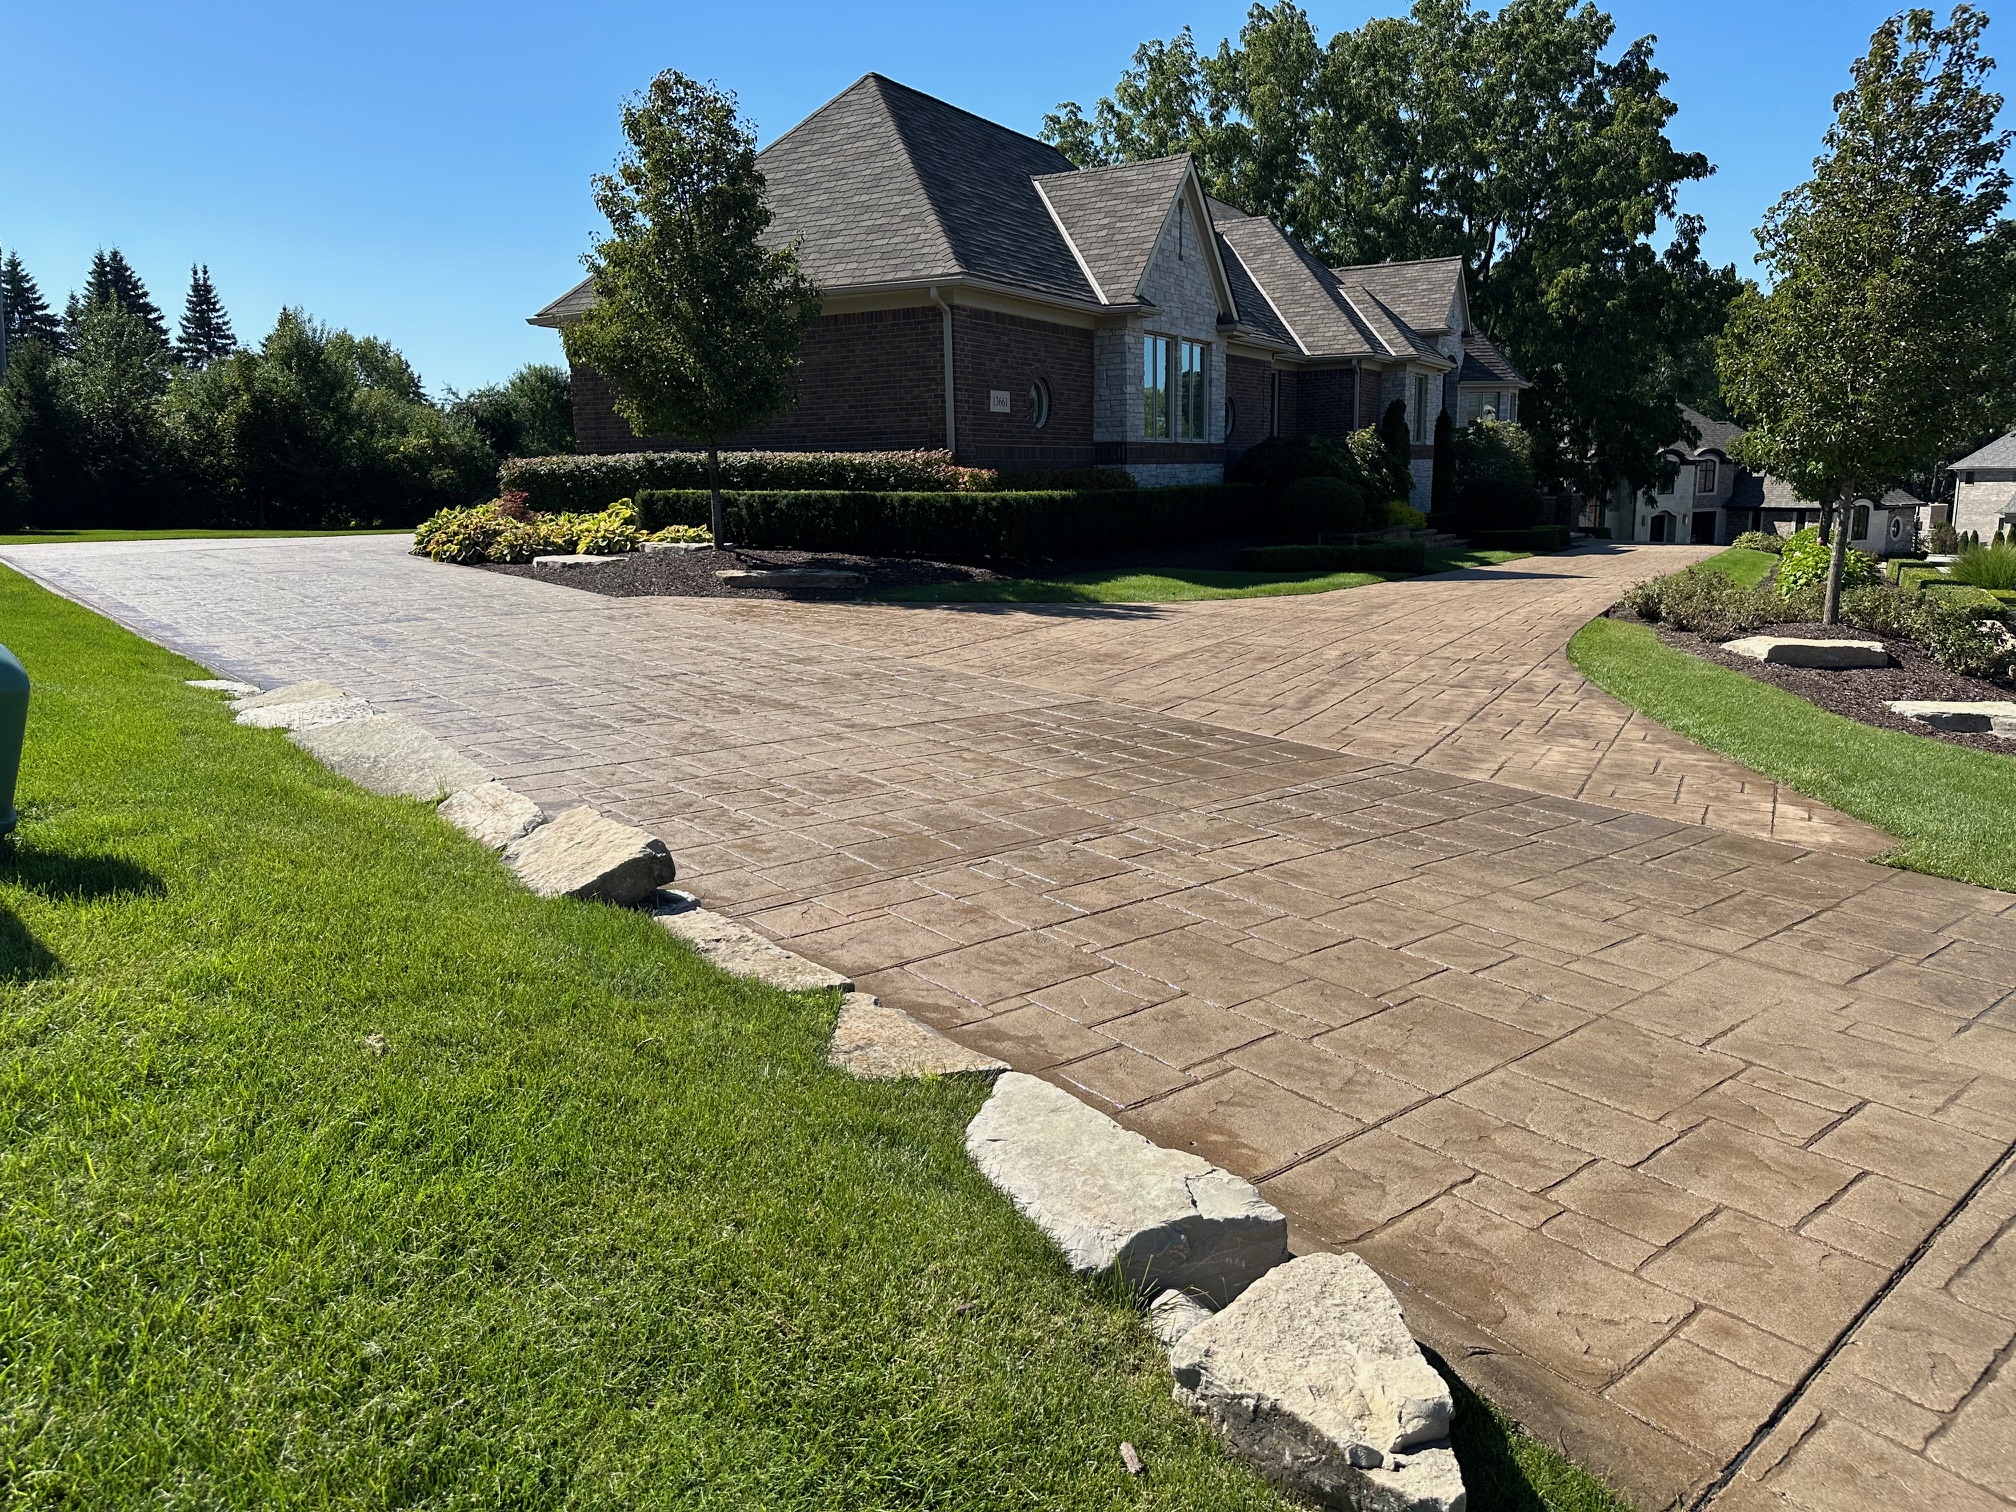 sealed driveway after driveway cleaning in Macomb township